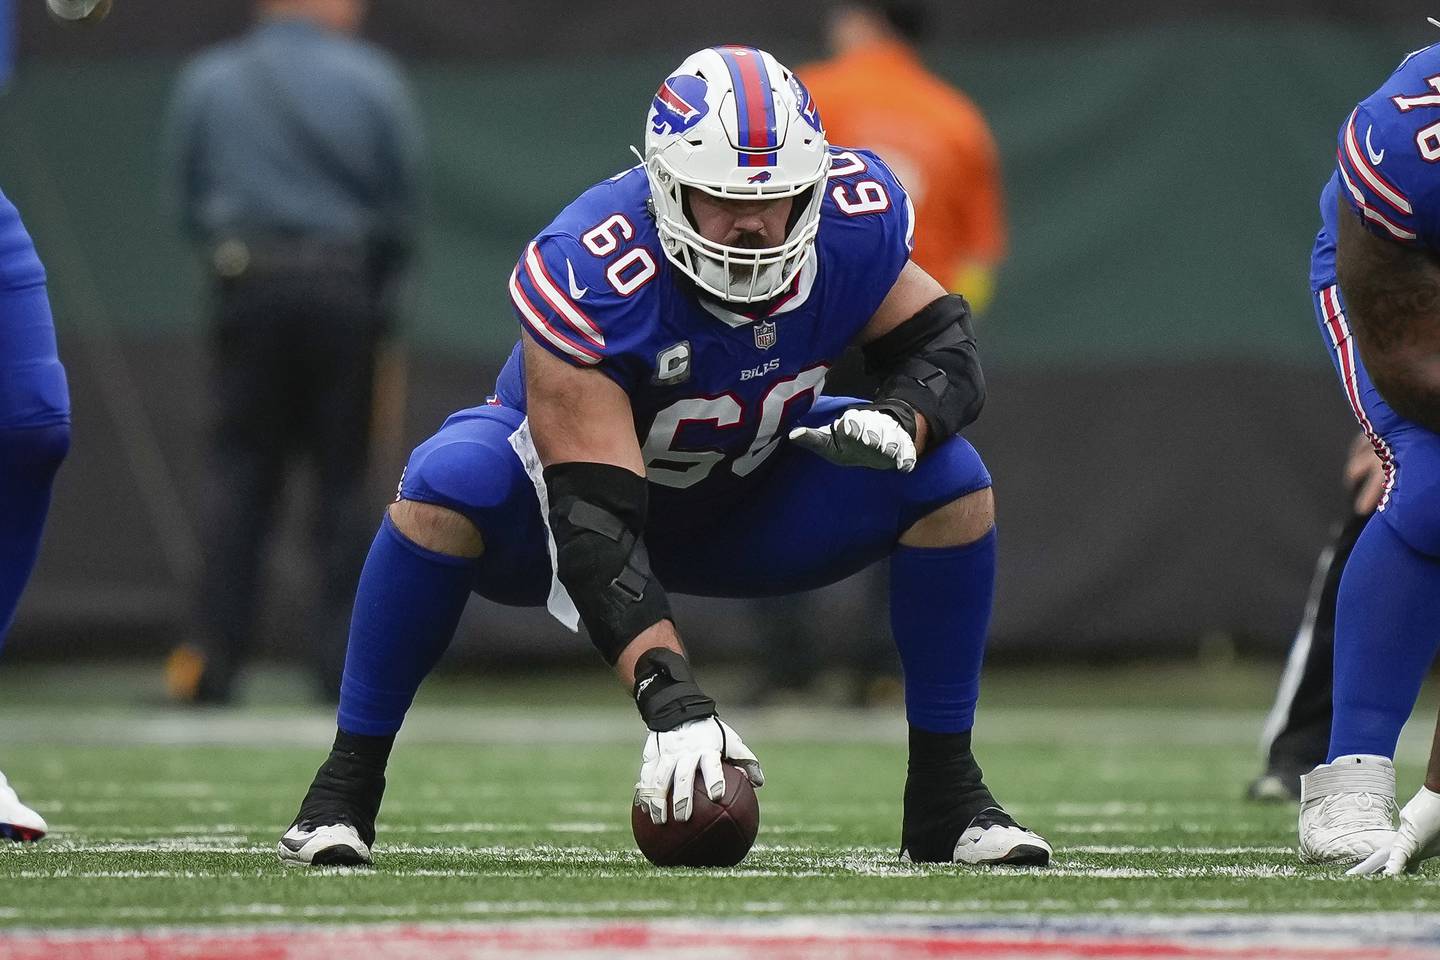 Bills center Mitch Morse at the line of scrimmage during the second half of a game against the Jets on Nov. 6, 2022.